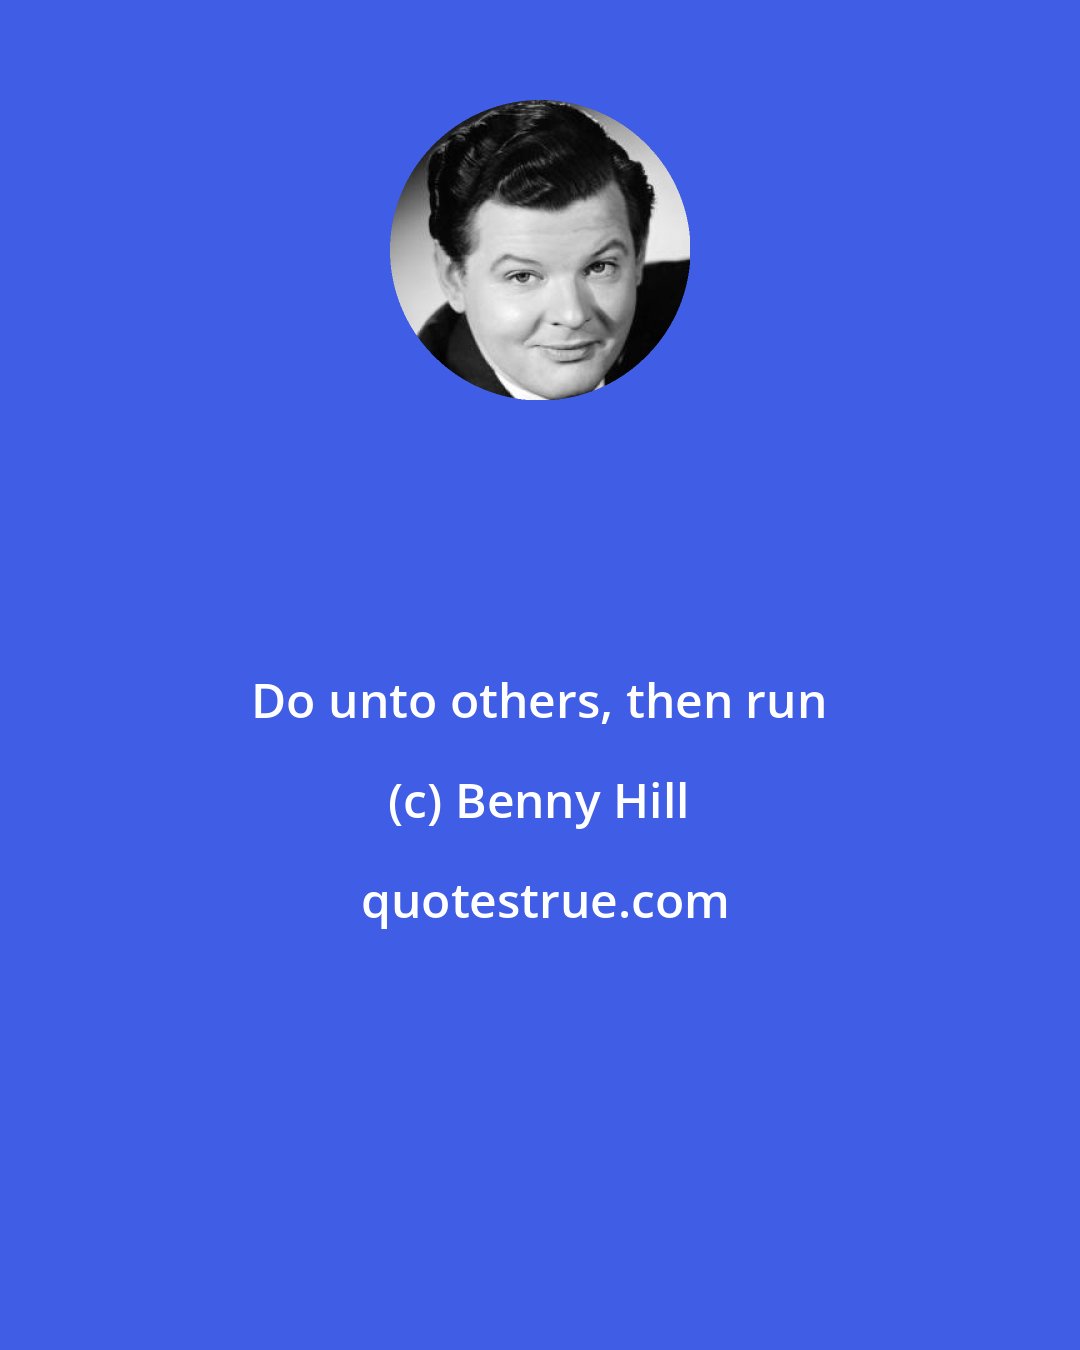 Benny Hill: Do unto others, then run